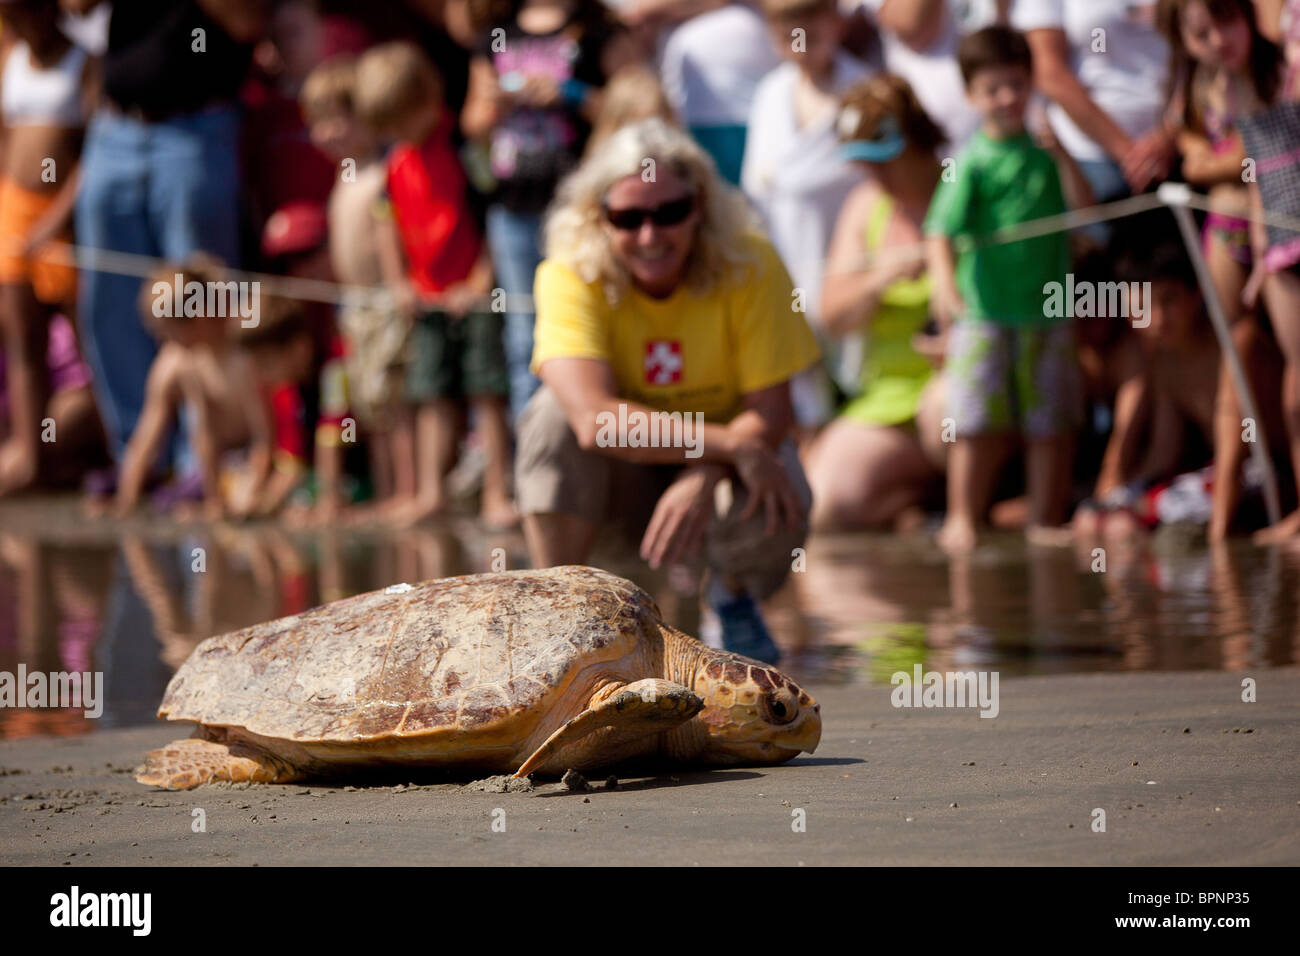 A rehabilitated loggerhead sea turtle released back to the ocean by the Turtle Rescue Team on the Isle of Palms, SC Stock Photo